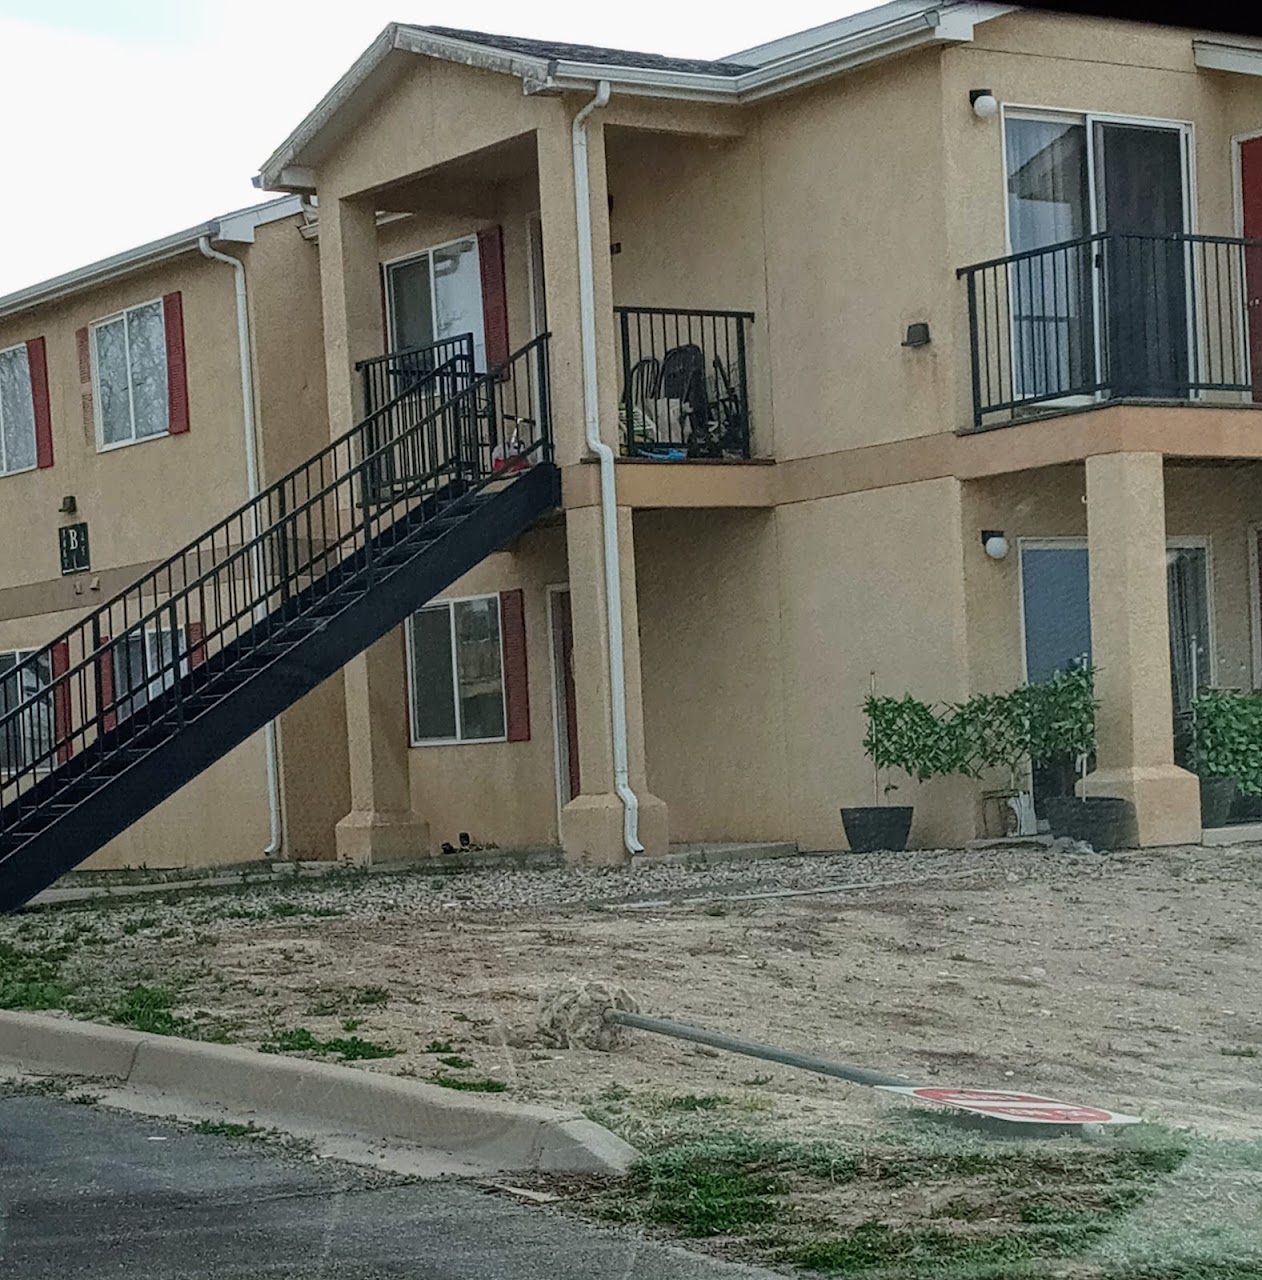 Photo of 55 STONEGATE VILLAGE. Affordable housing located at 393 E SPAULDING AVE PUEBLO WEST, CO 81007